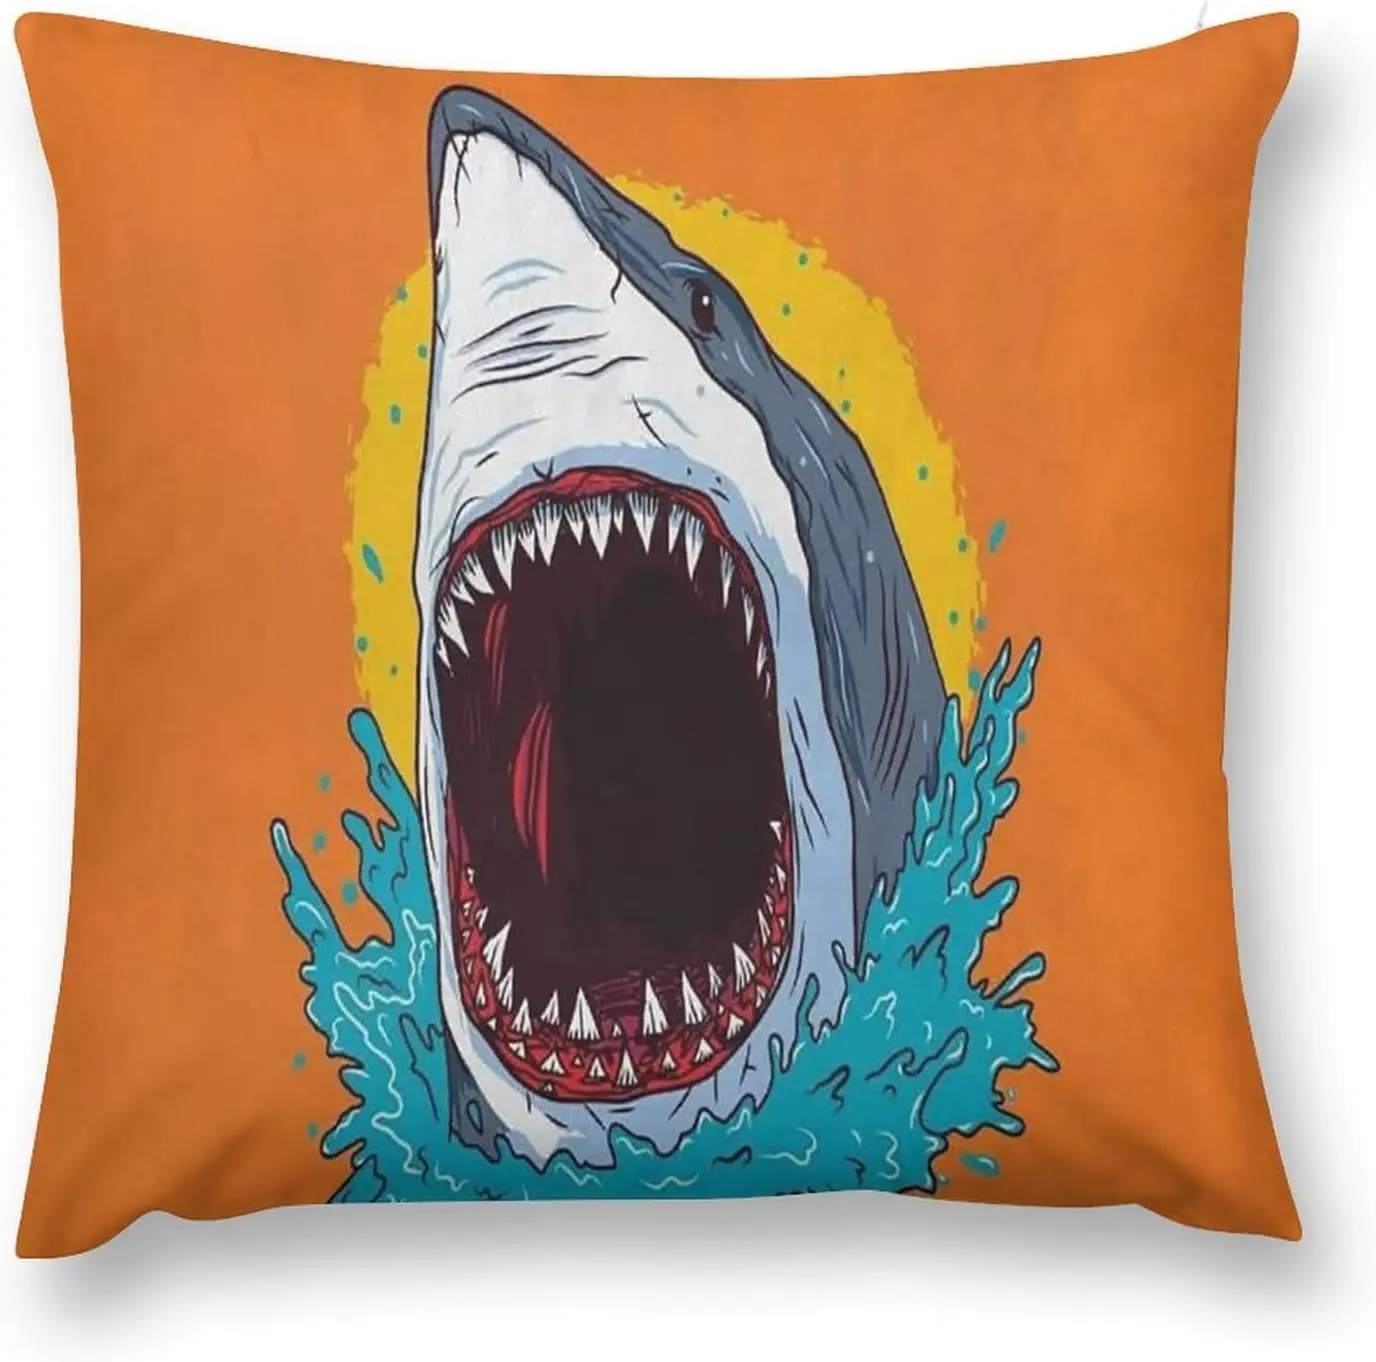 

Attacking of Shark White Throw Pillow Covers Luxury Pillowcases Couch Pillows for Living Room Sofa Accent Pillows Covers,1PC